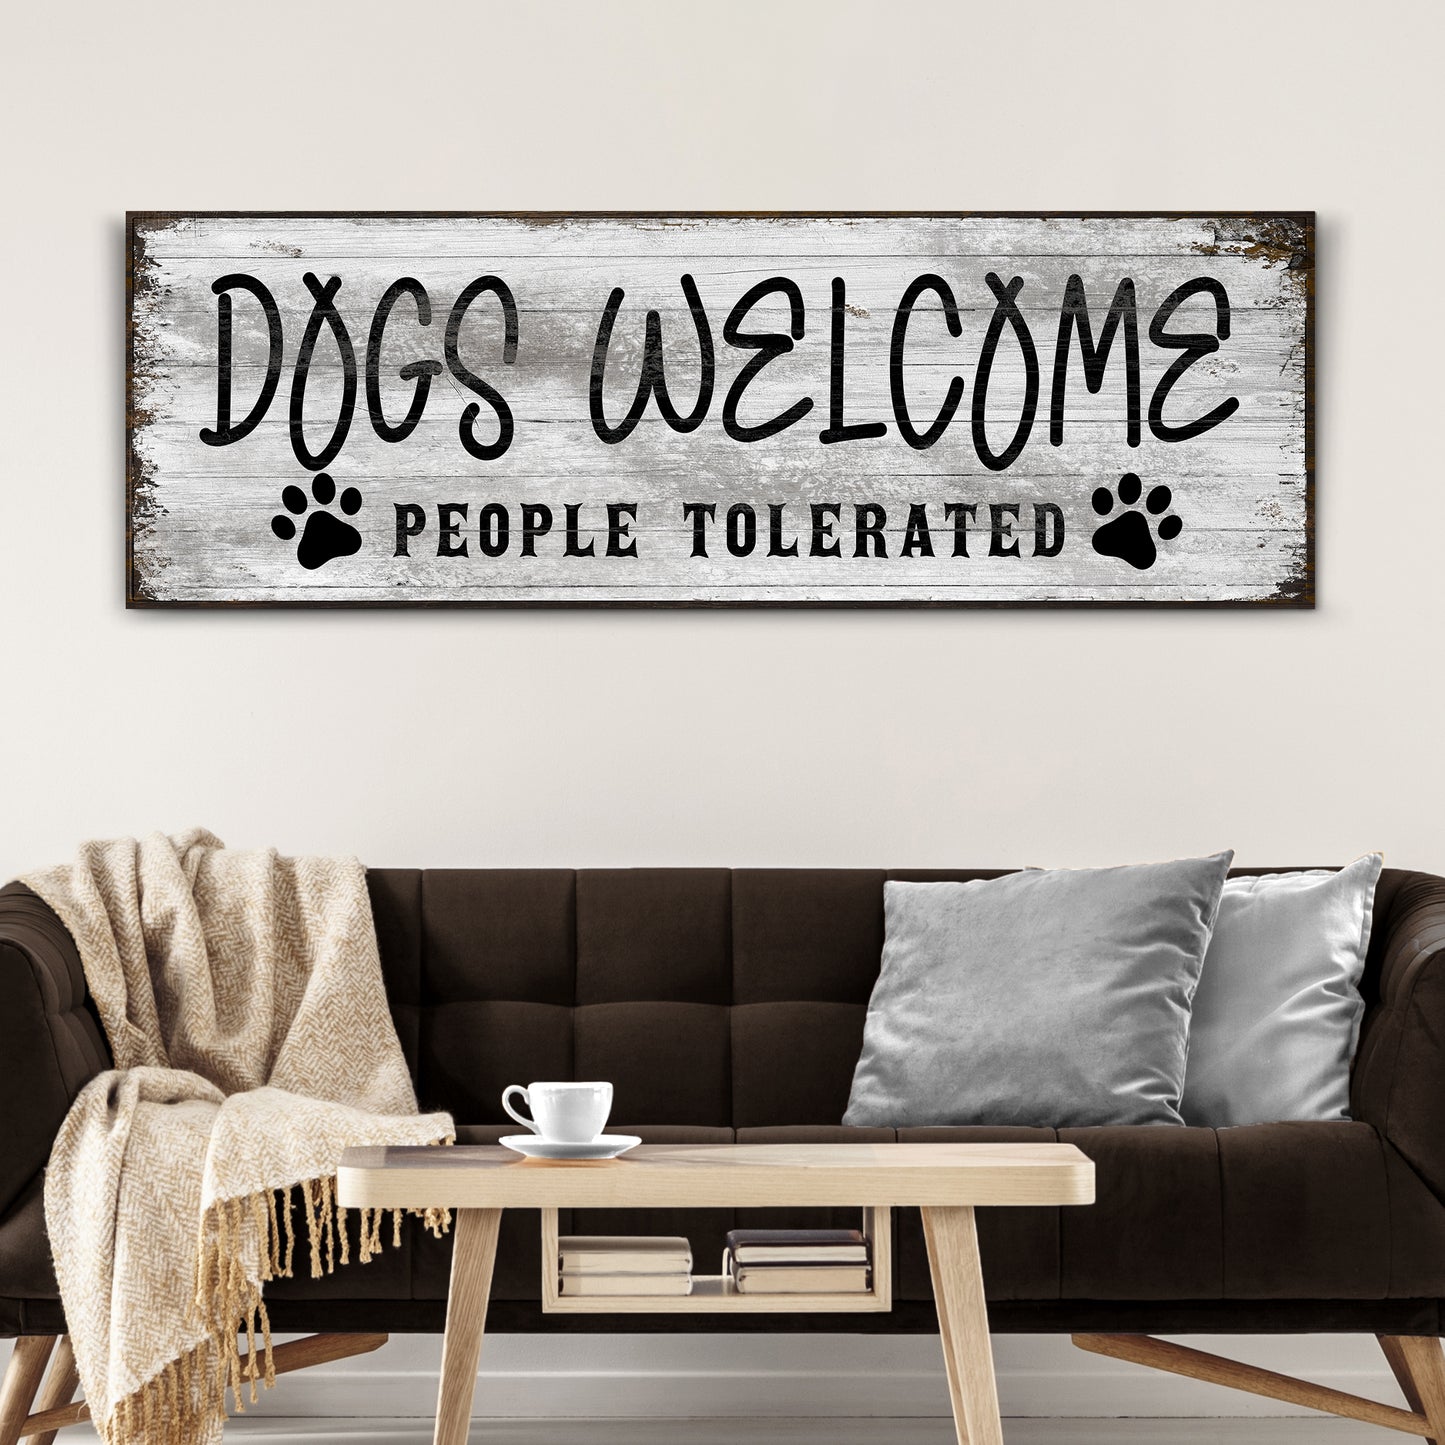 Dogs Welcome People Tolerated Sign - Image by Tailored Canvases